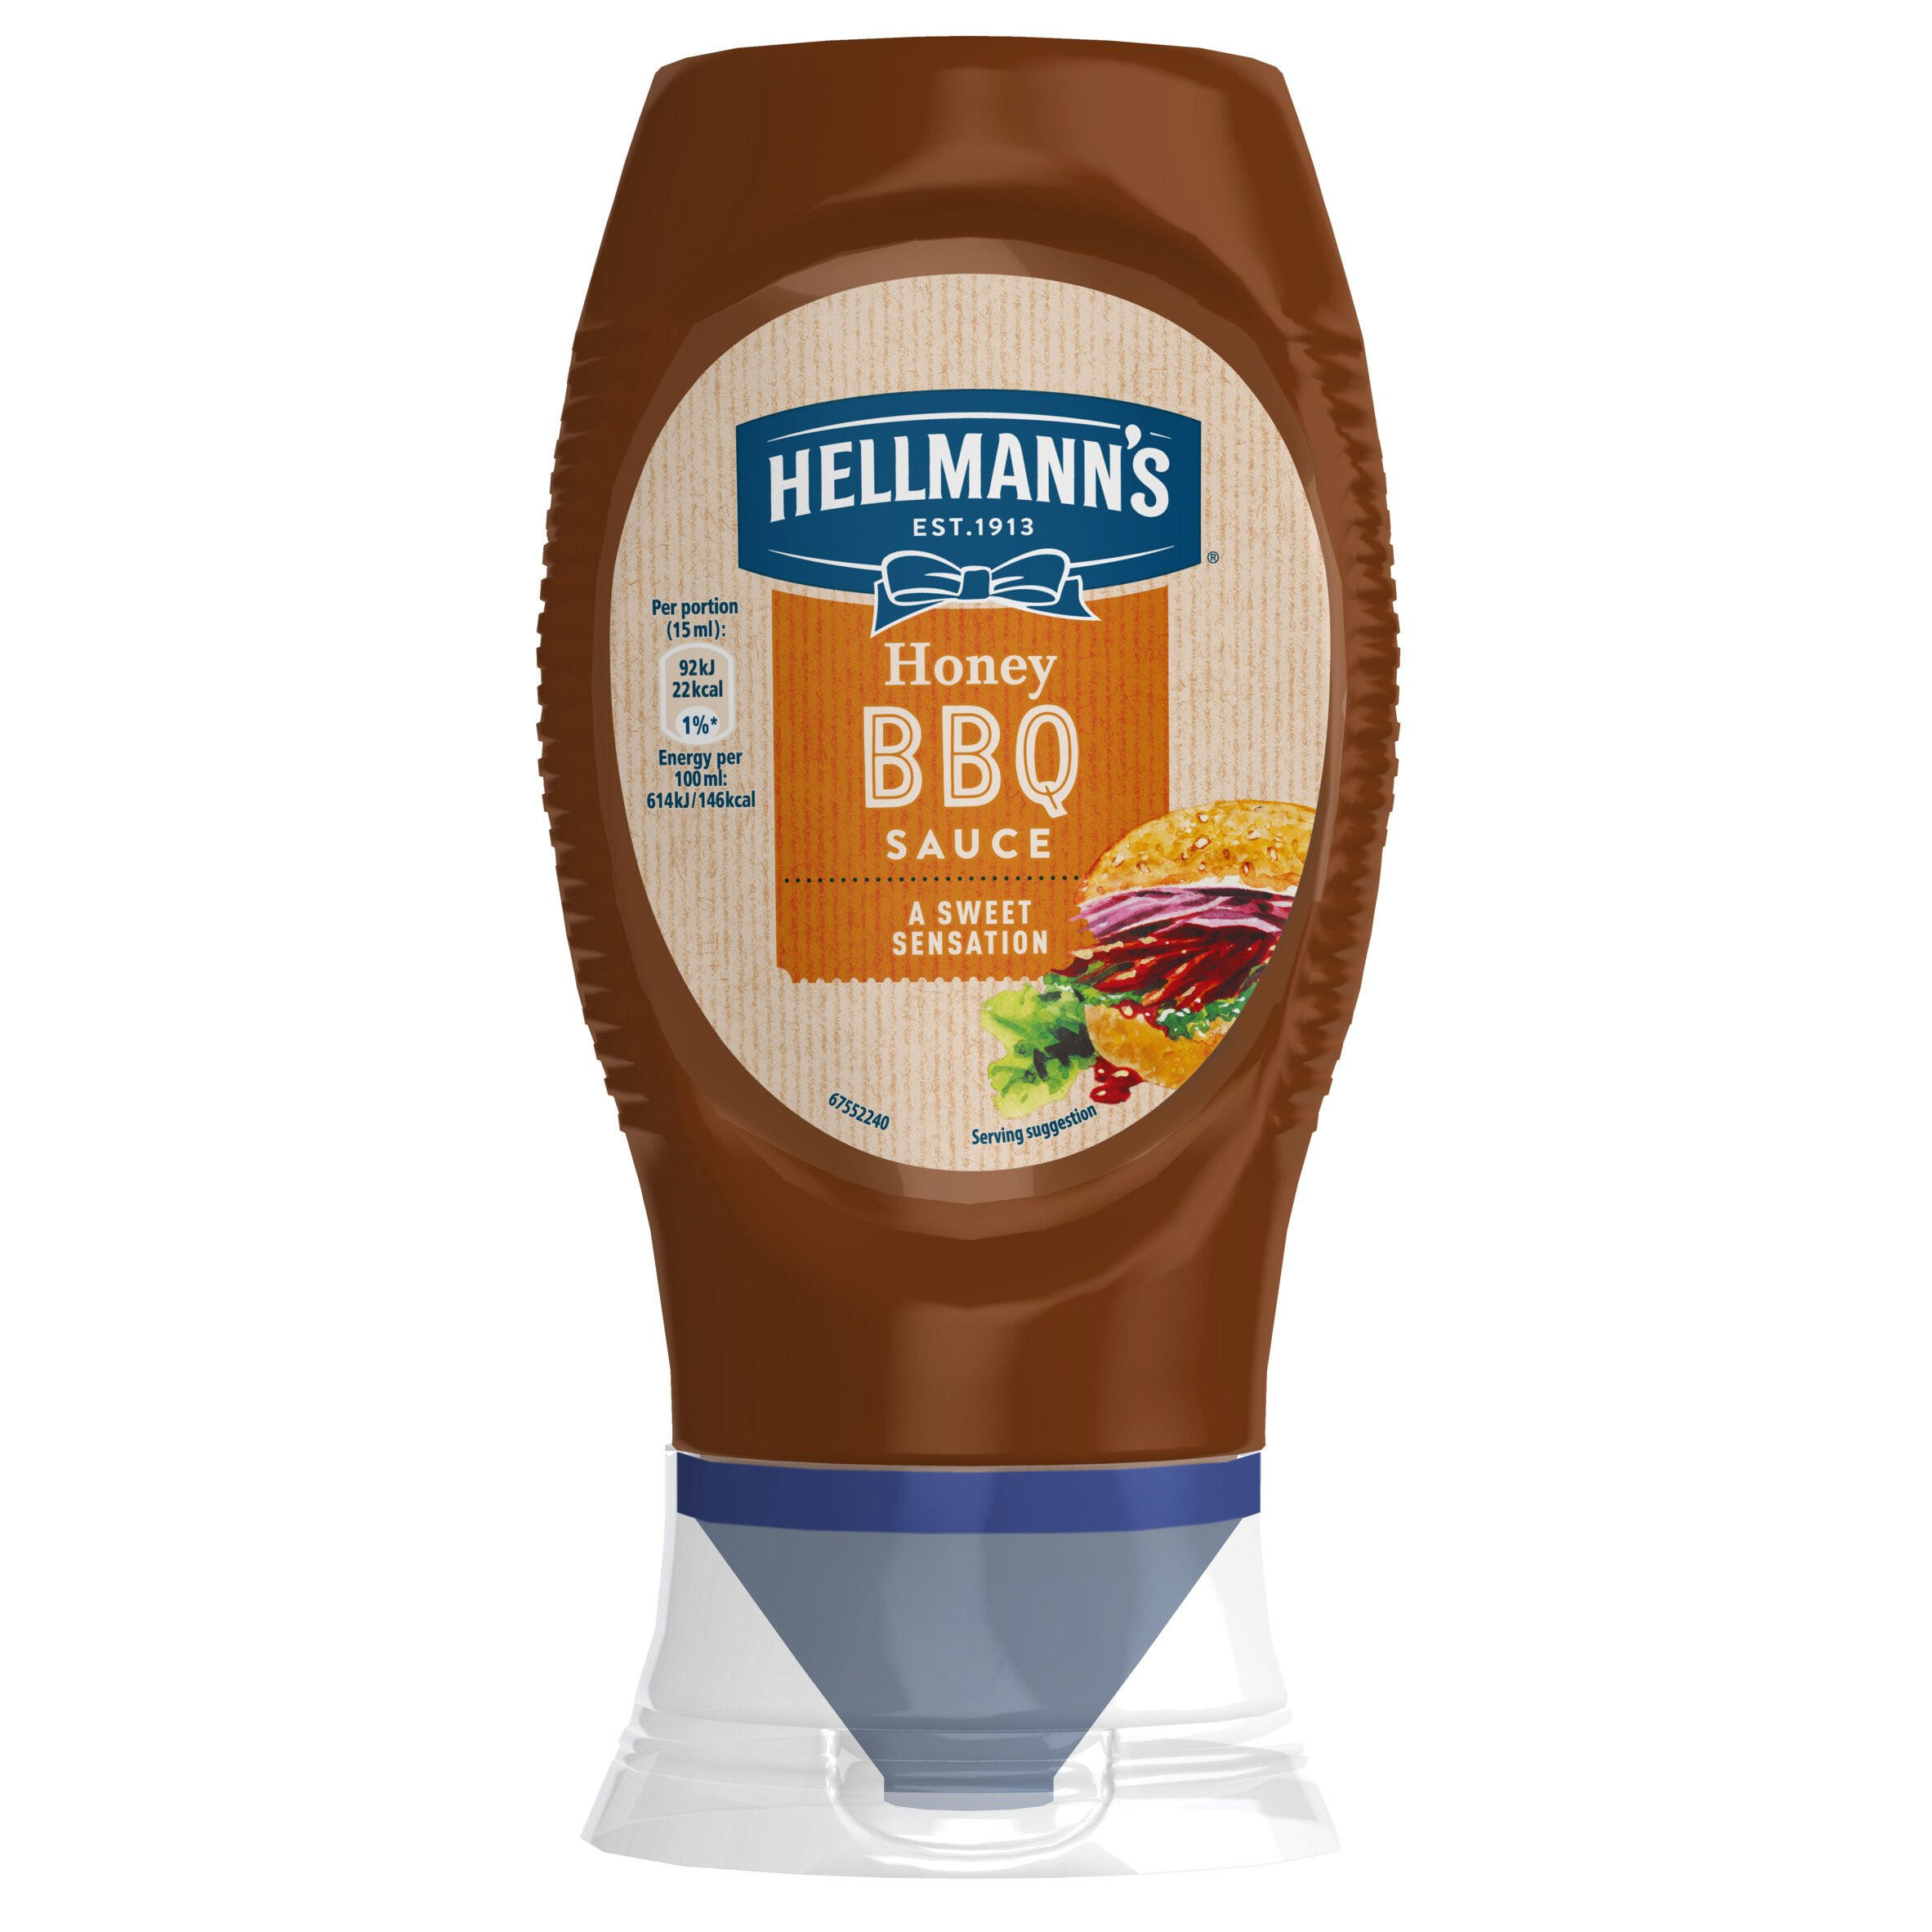 Hellmann's BBQ Sauce 250ml ❤️ home delivery from the store